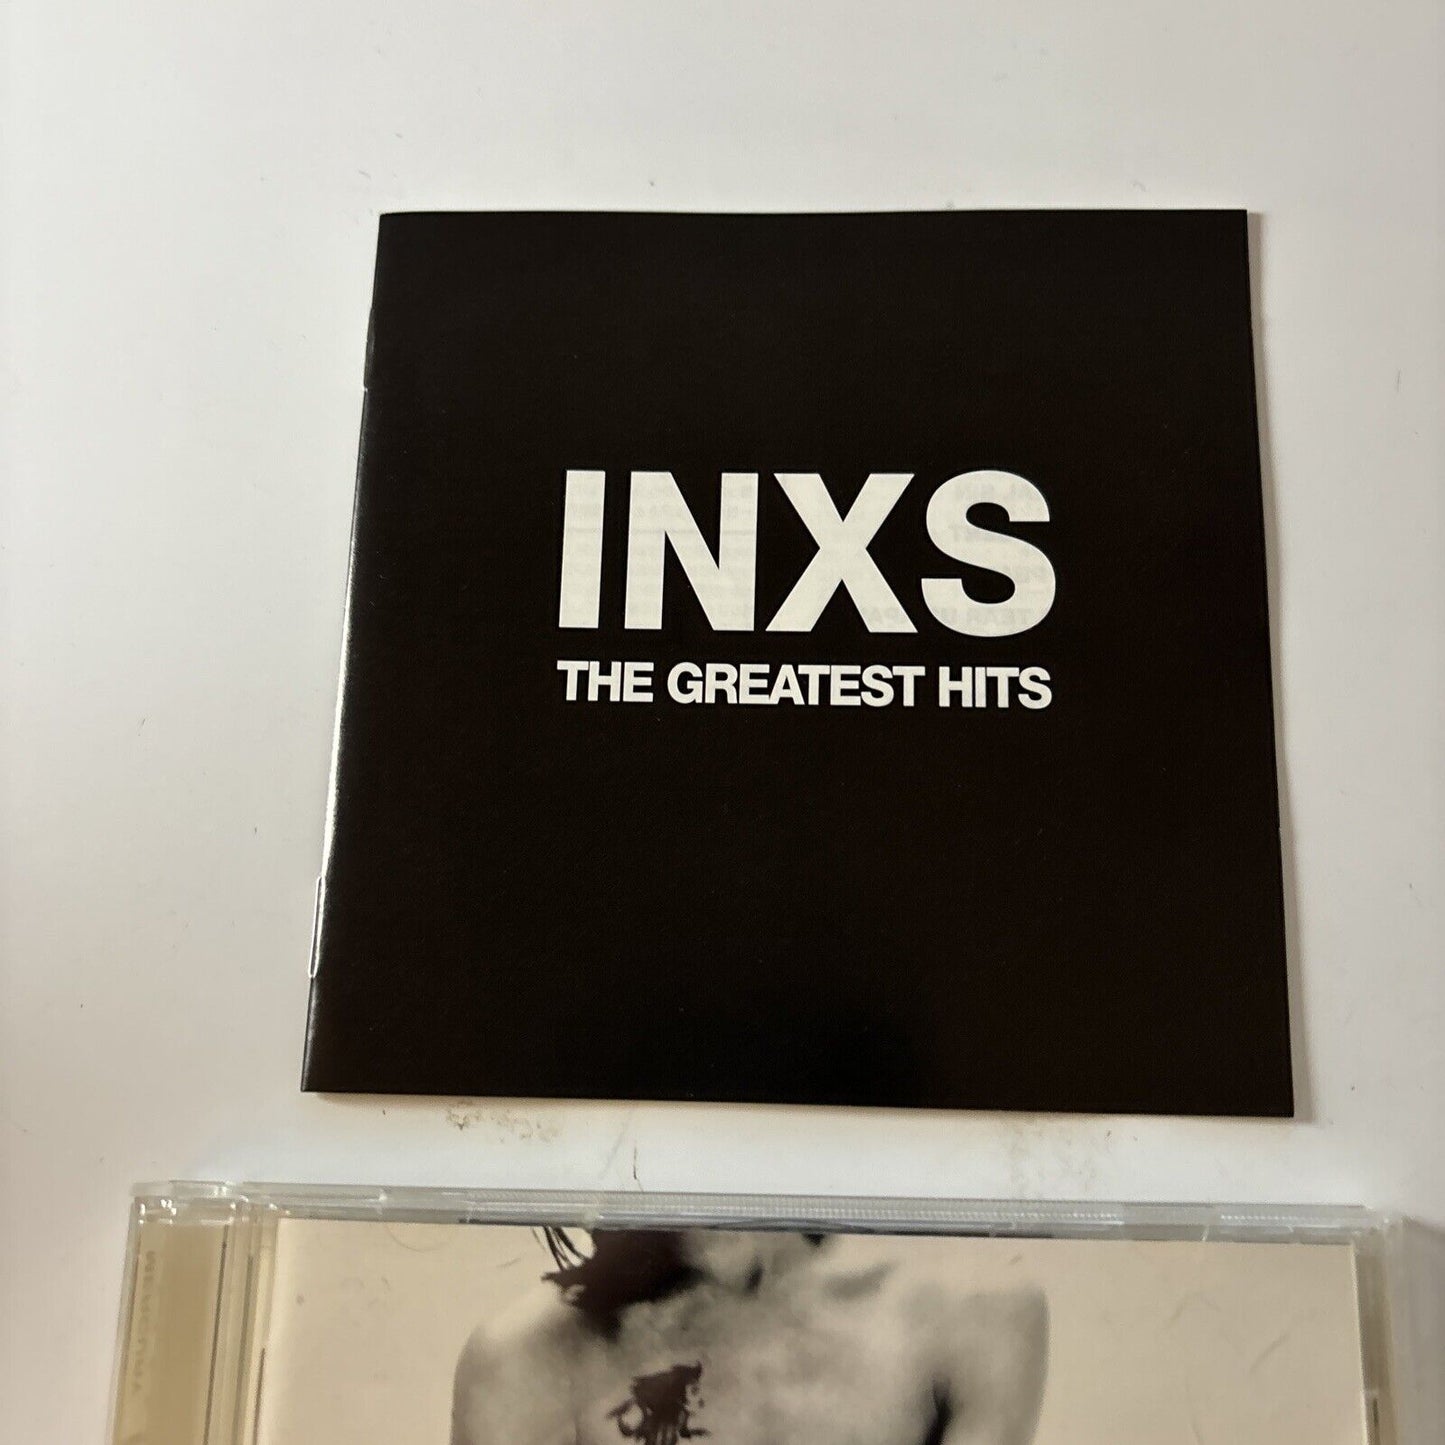 INXS - The Greatest Hits (CD, 1997) Japan Phcr-1514